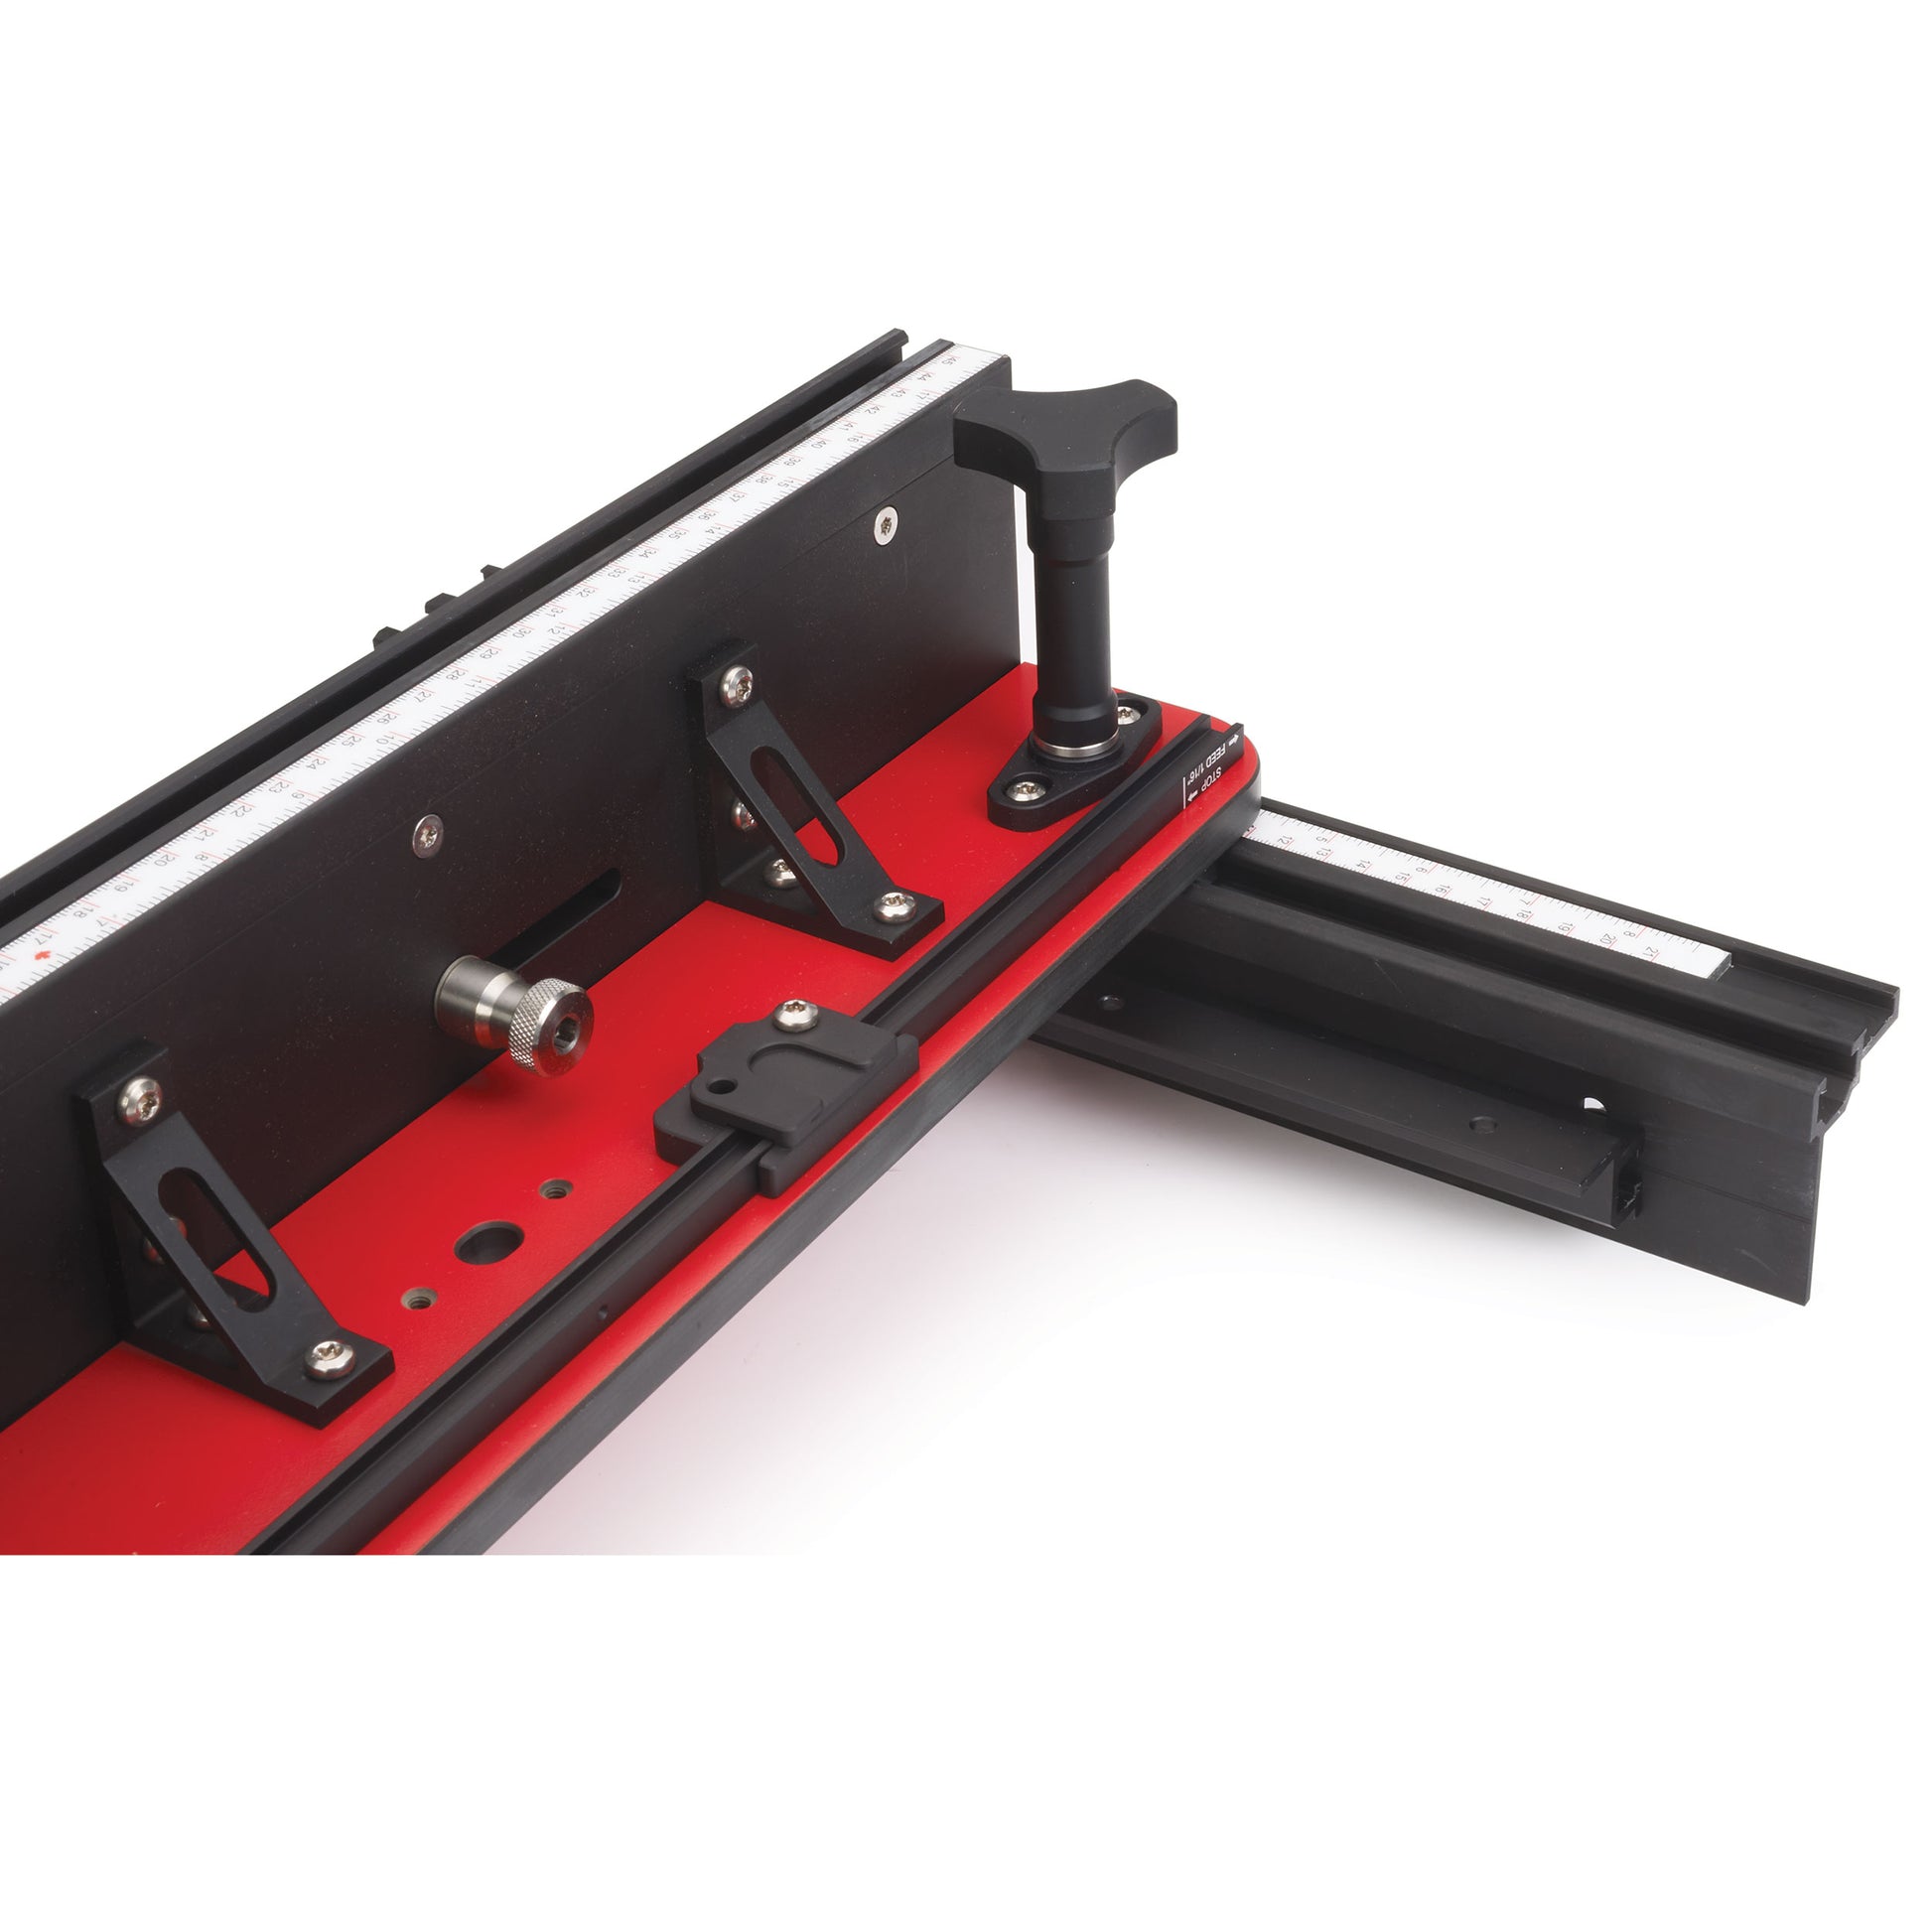 Mast-R-Fence III Router Table Fence alt 0